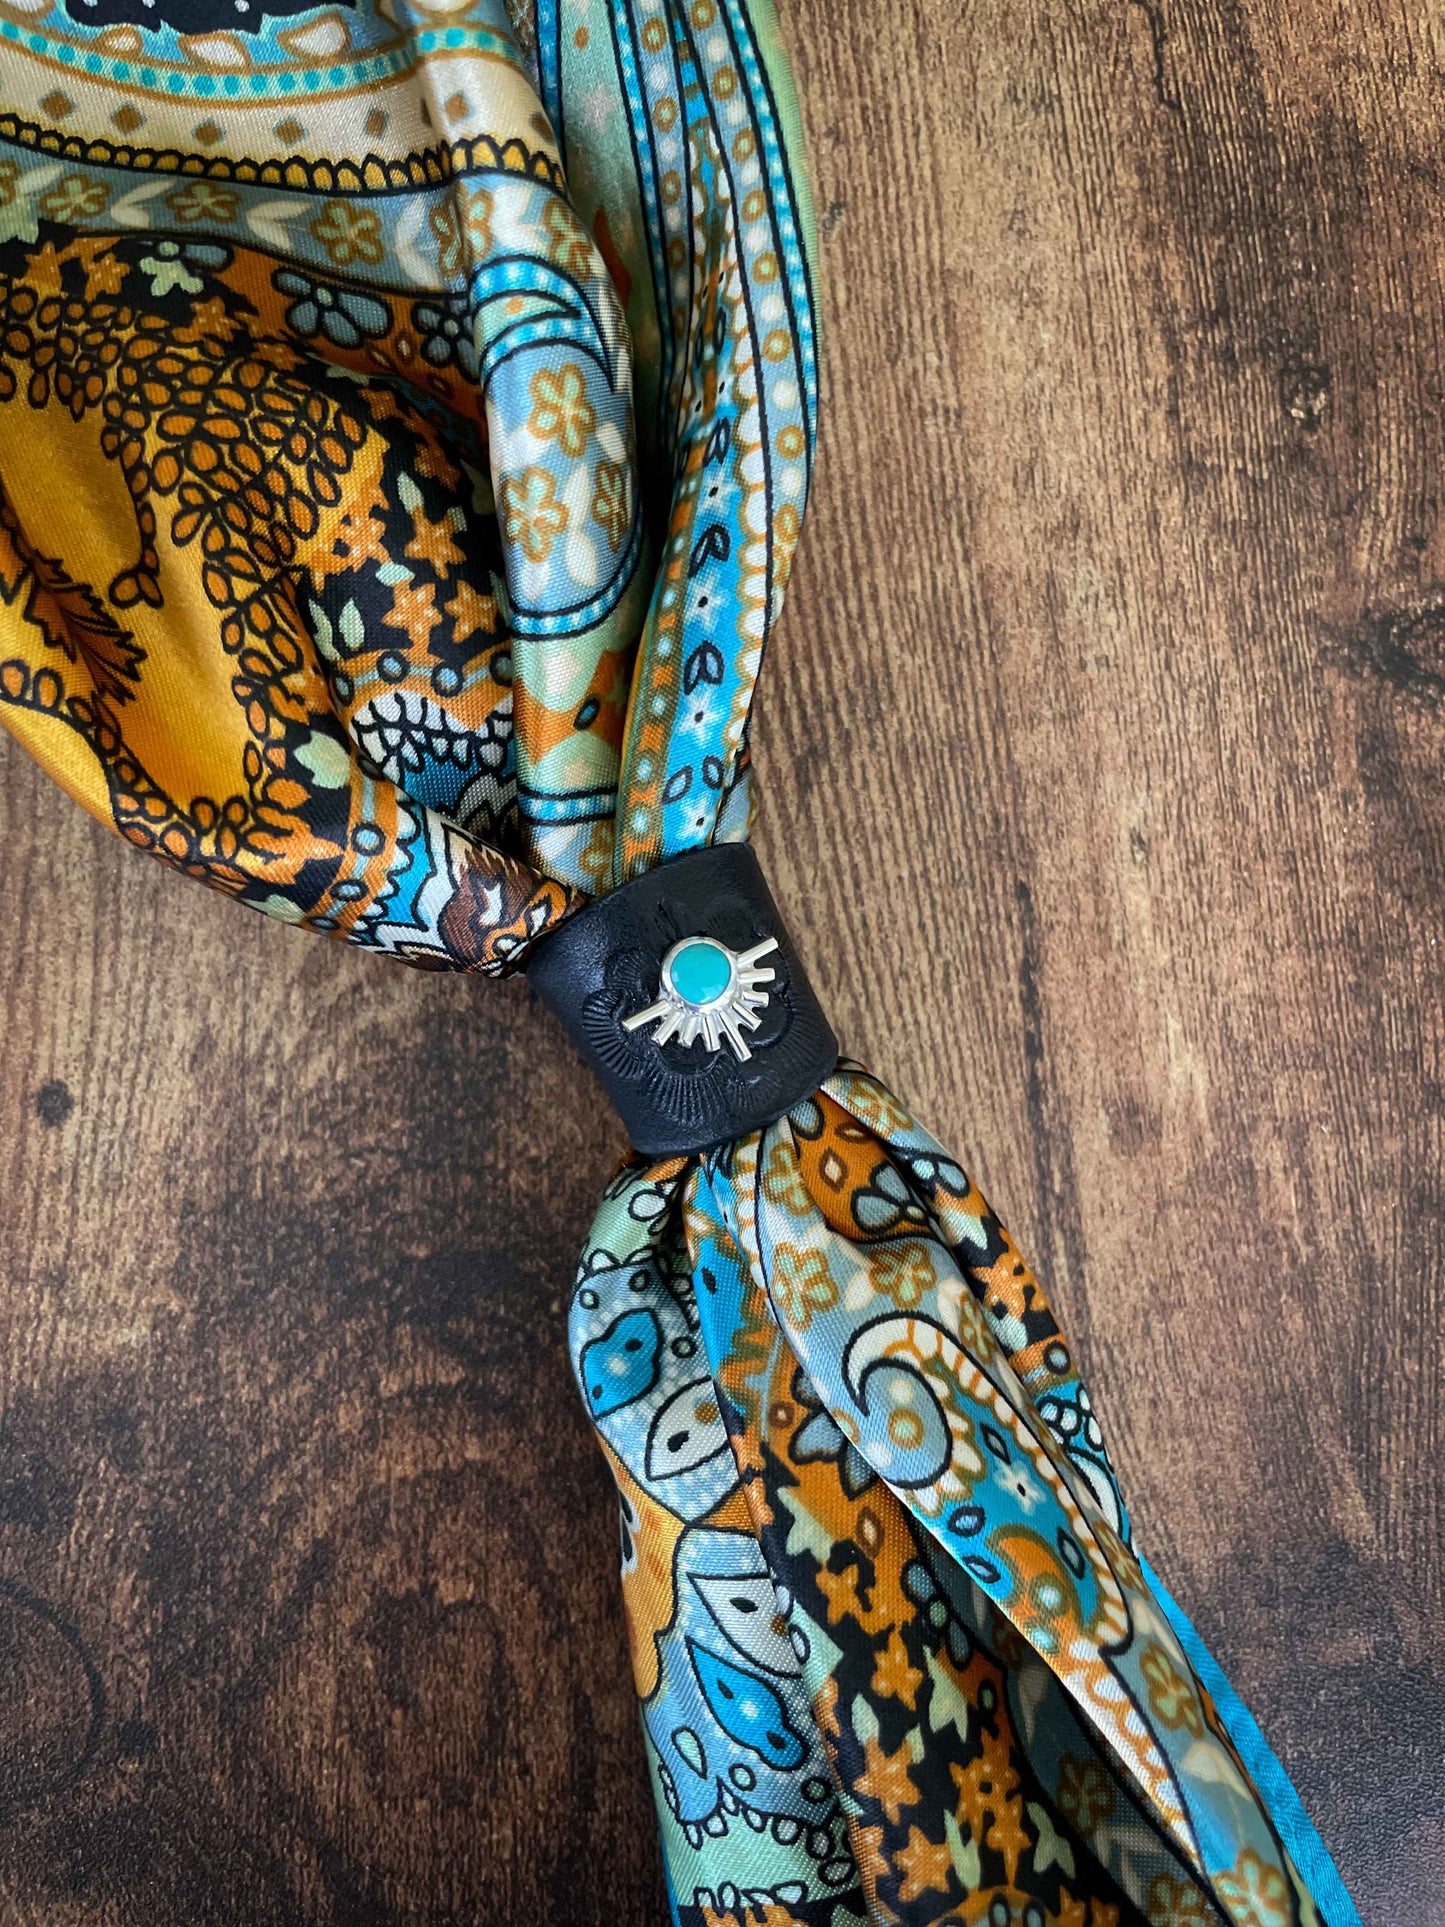 Sterling silver, turquoise, and black leather wild rag scarf slide on a colorful orange, black, pale green and blue silk scarf laying on a wood table.